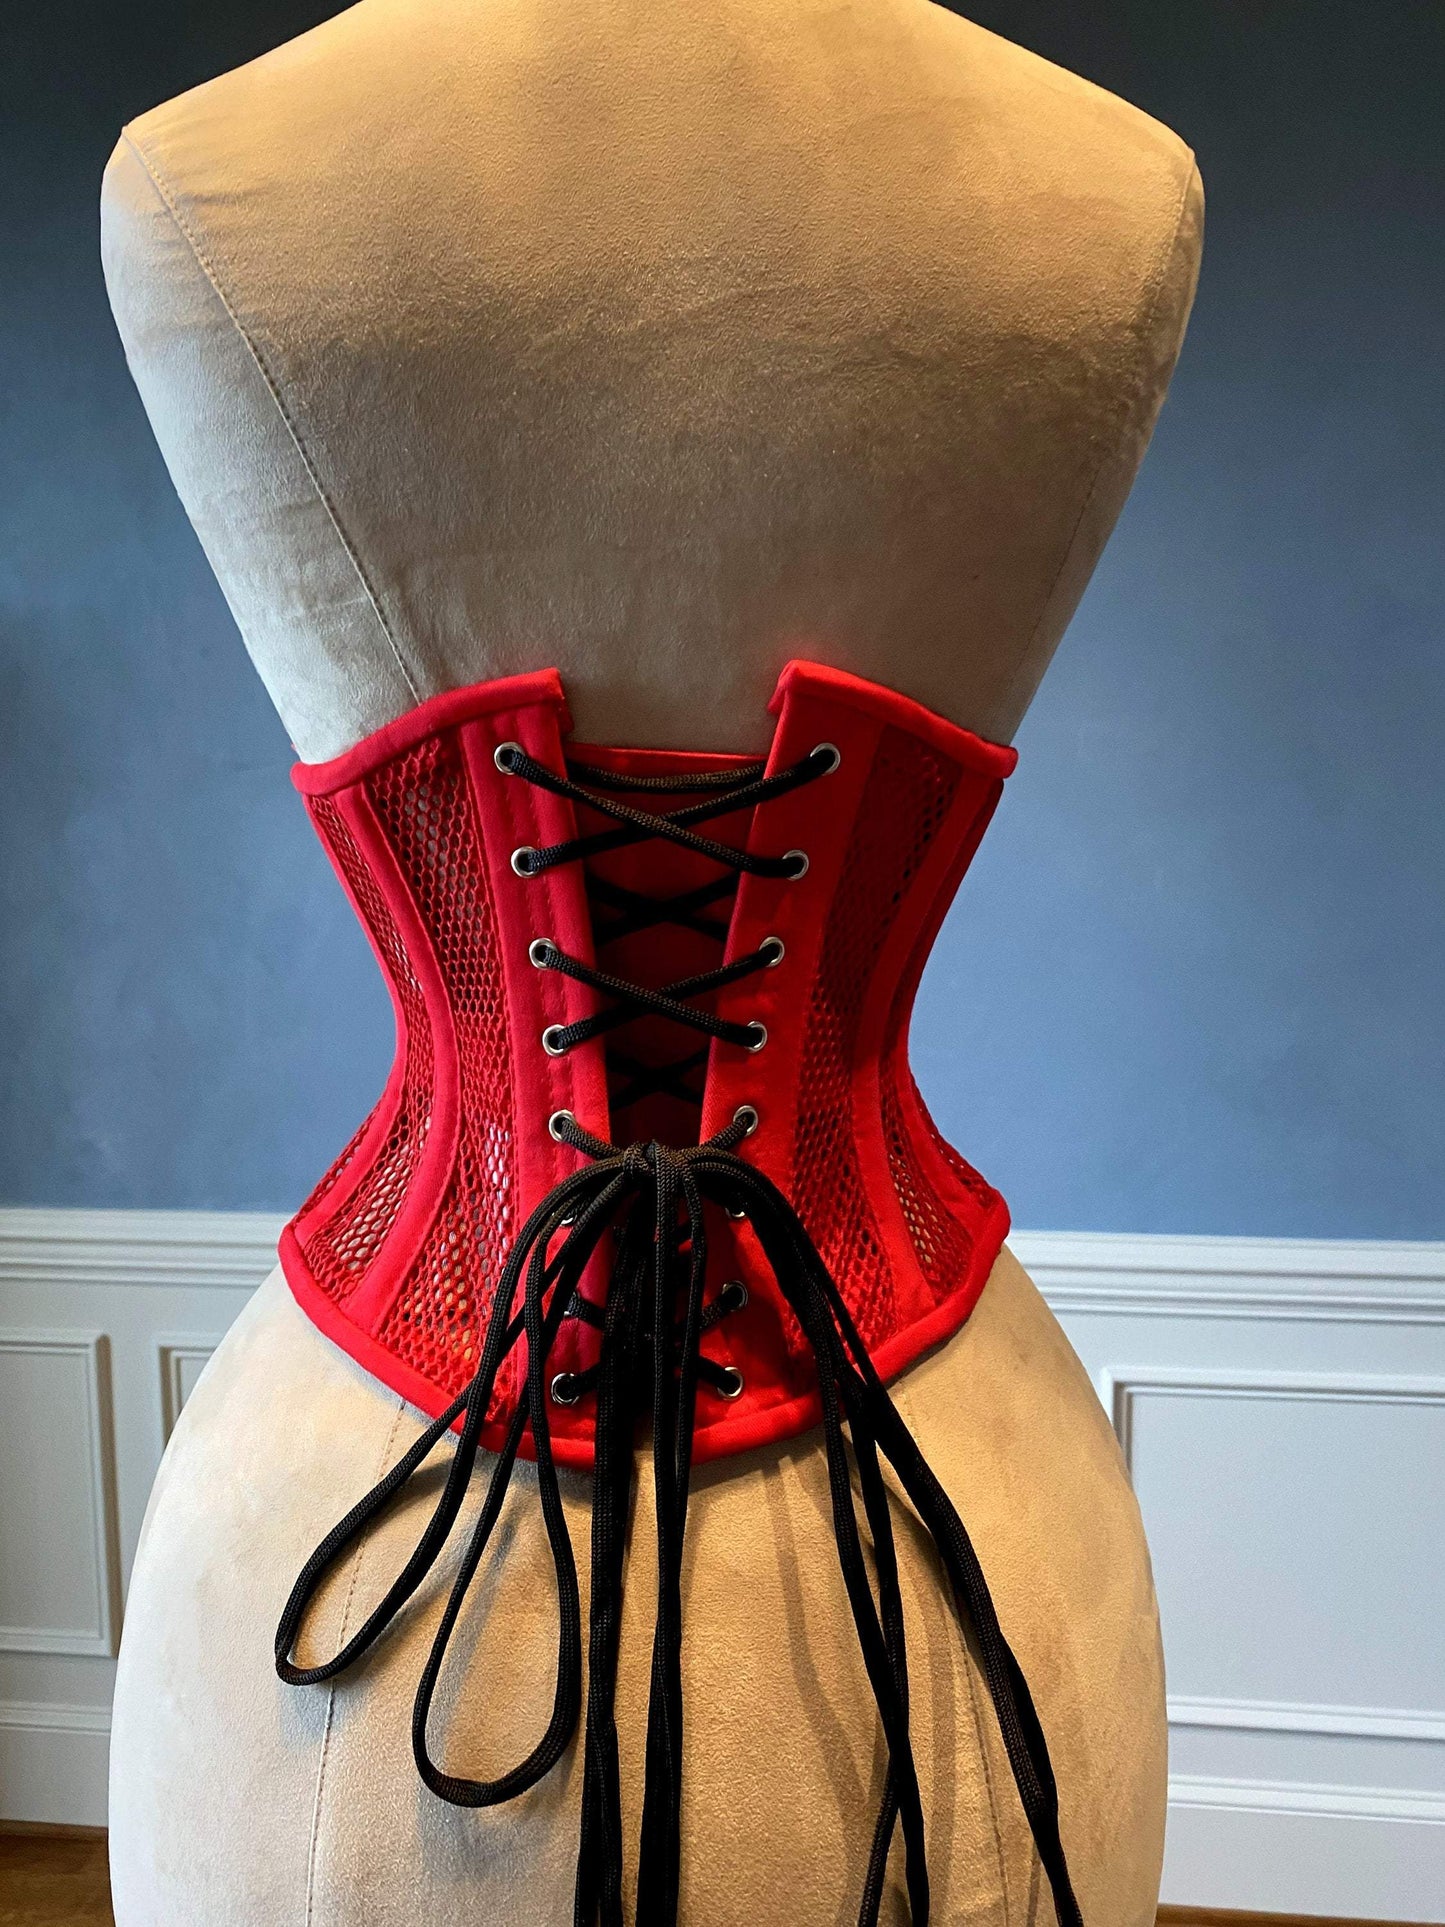 
                  
                    Real steel boned underbust underwear red corset from transparent mesh and cotton. Real waist training corset for tight lacing. Corsettery
                  
                